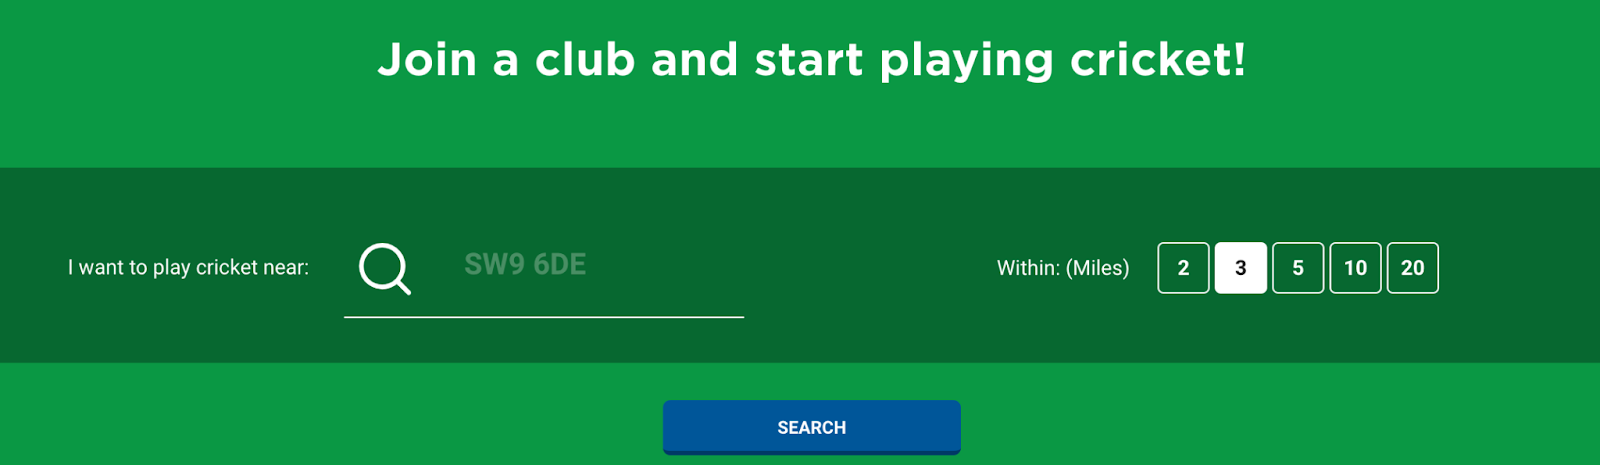 How to Find a Local Cricket Club to Join 1